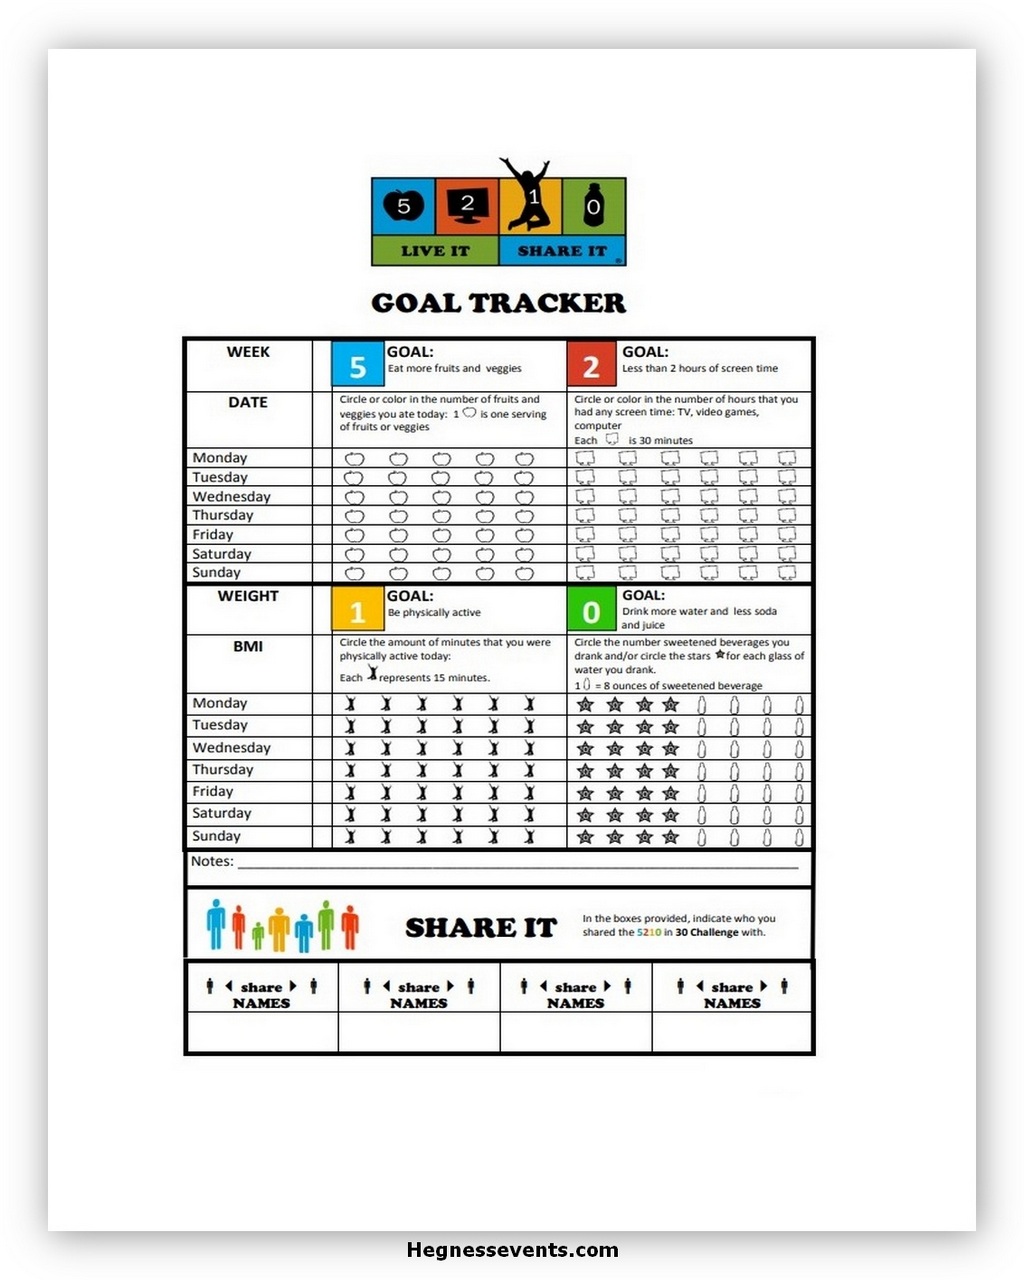 11-free-goal-tracker-template-hennessy-events